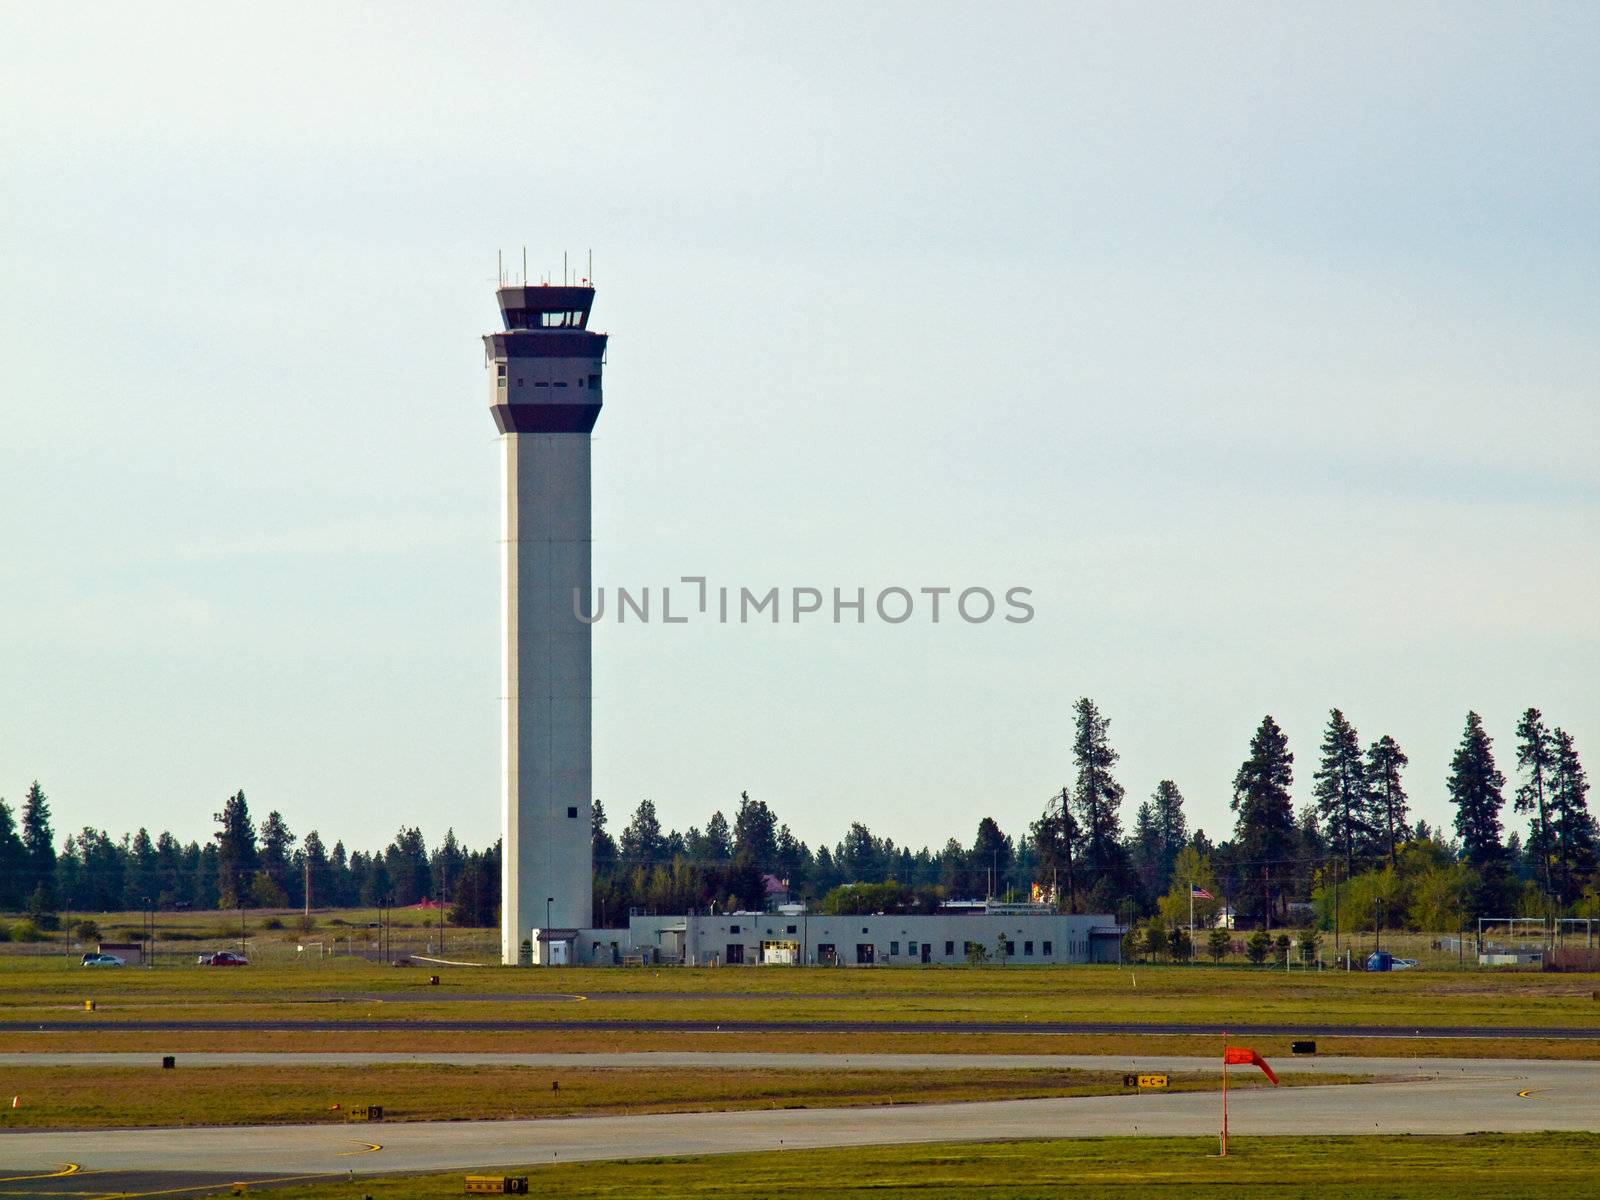 The Air Traffic Control Tower of a Modern Airport by Frankljunior